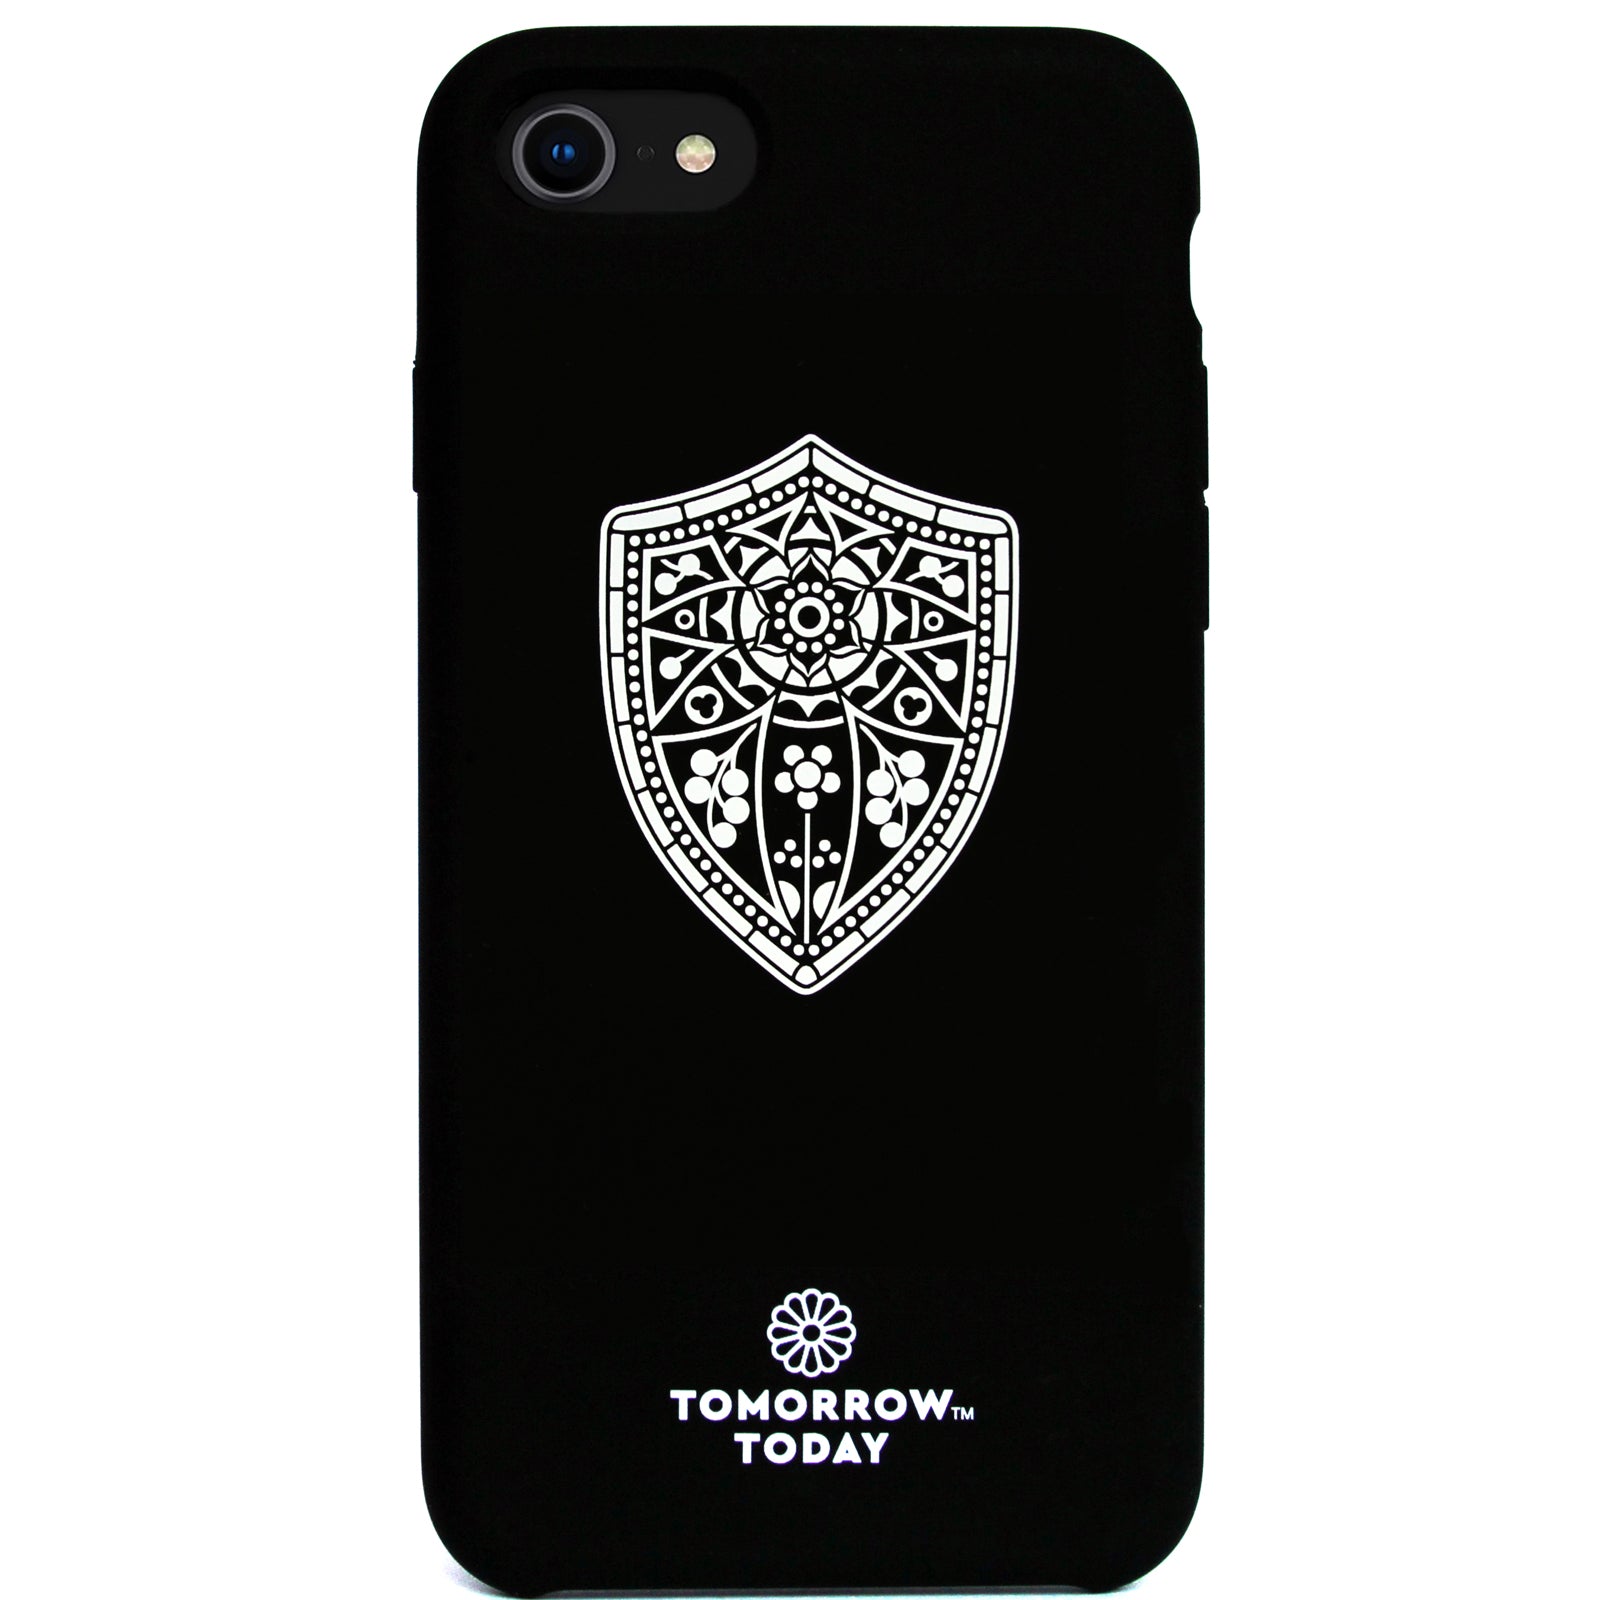 The Shield - iPhone 7/8 Case